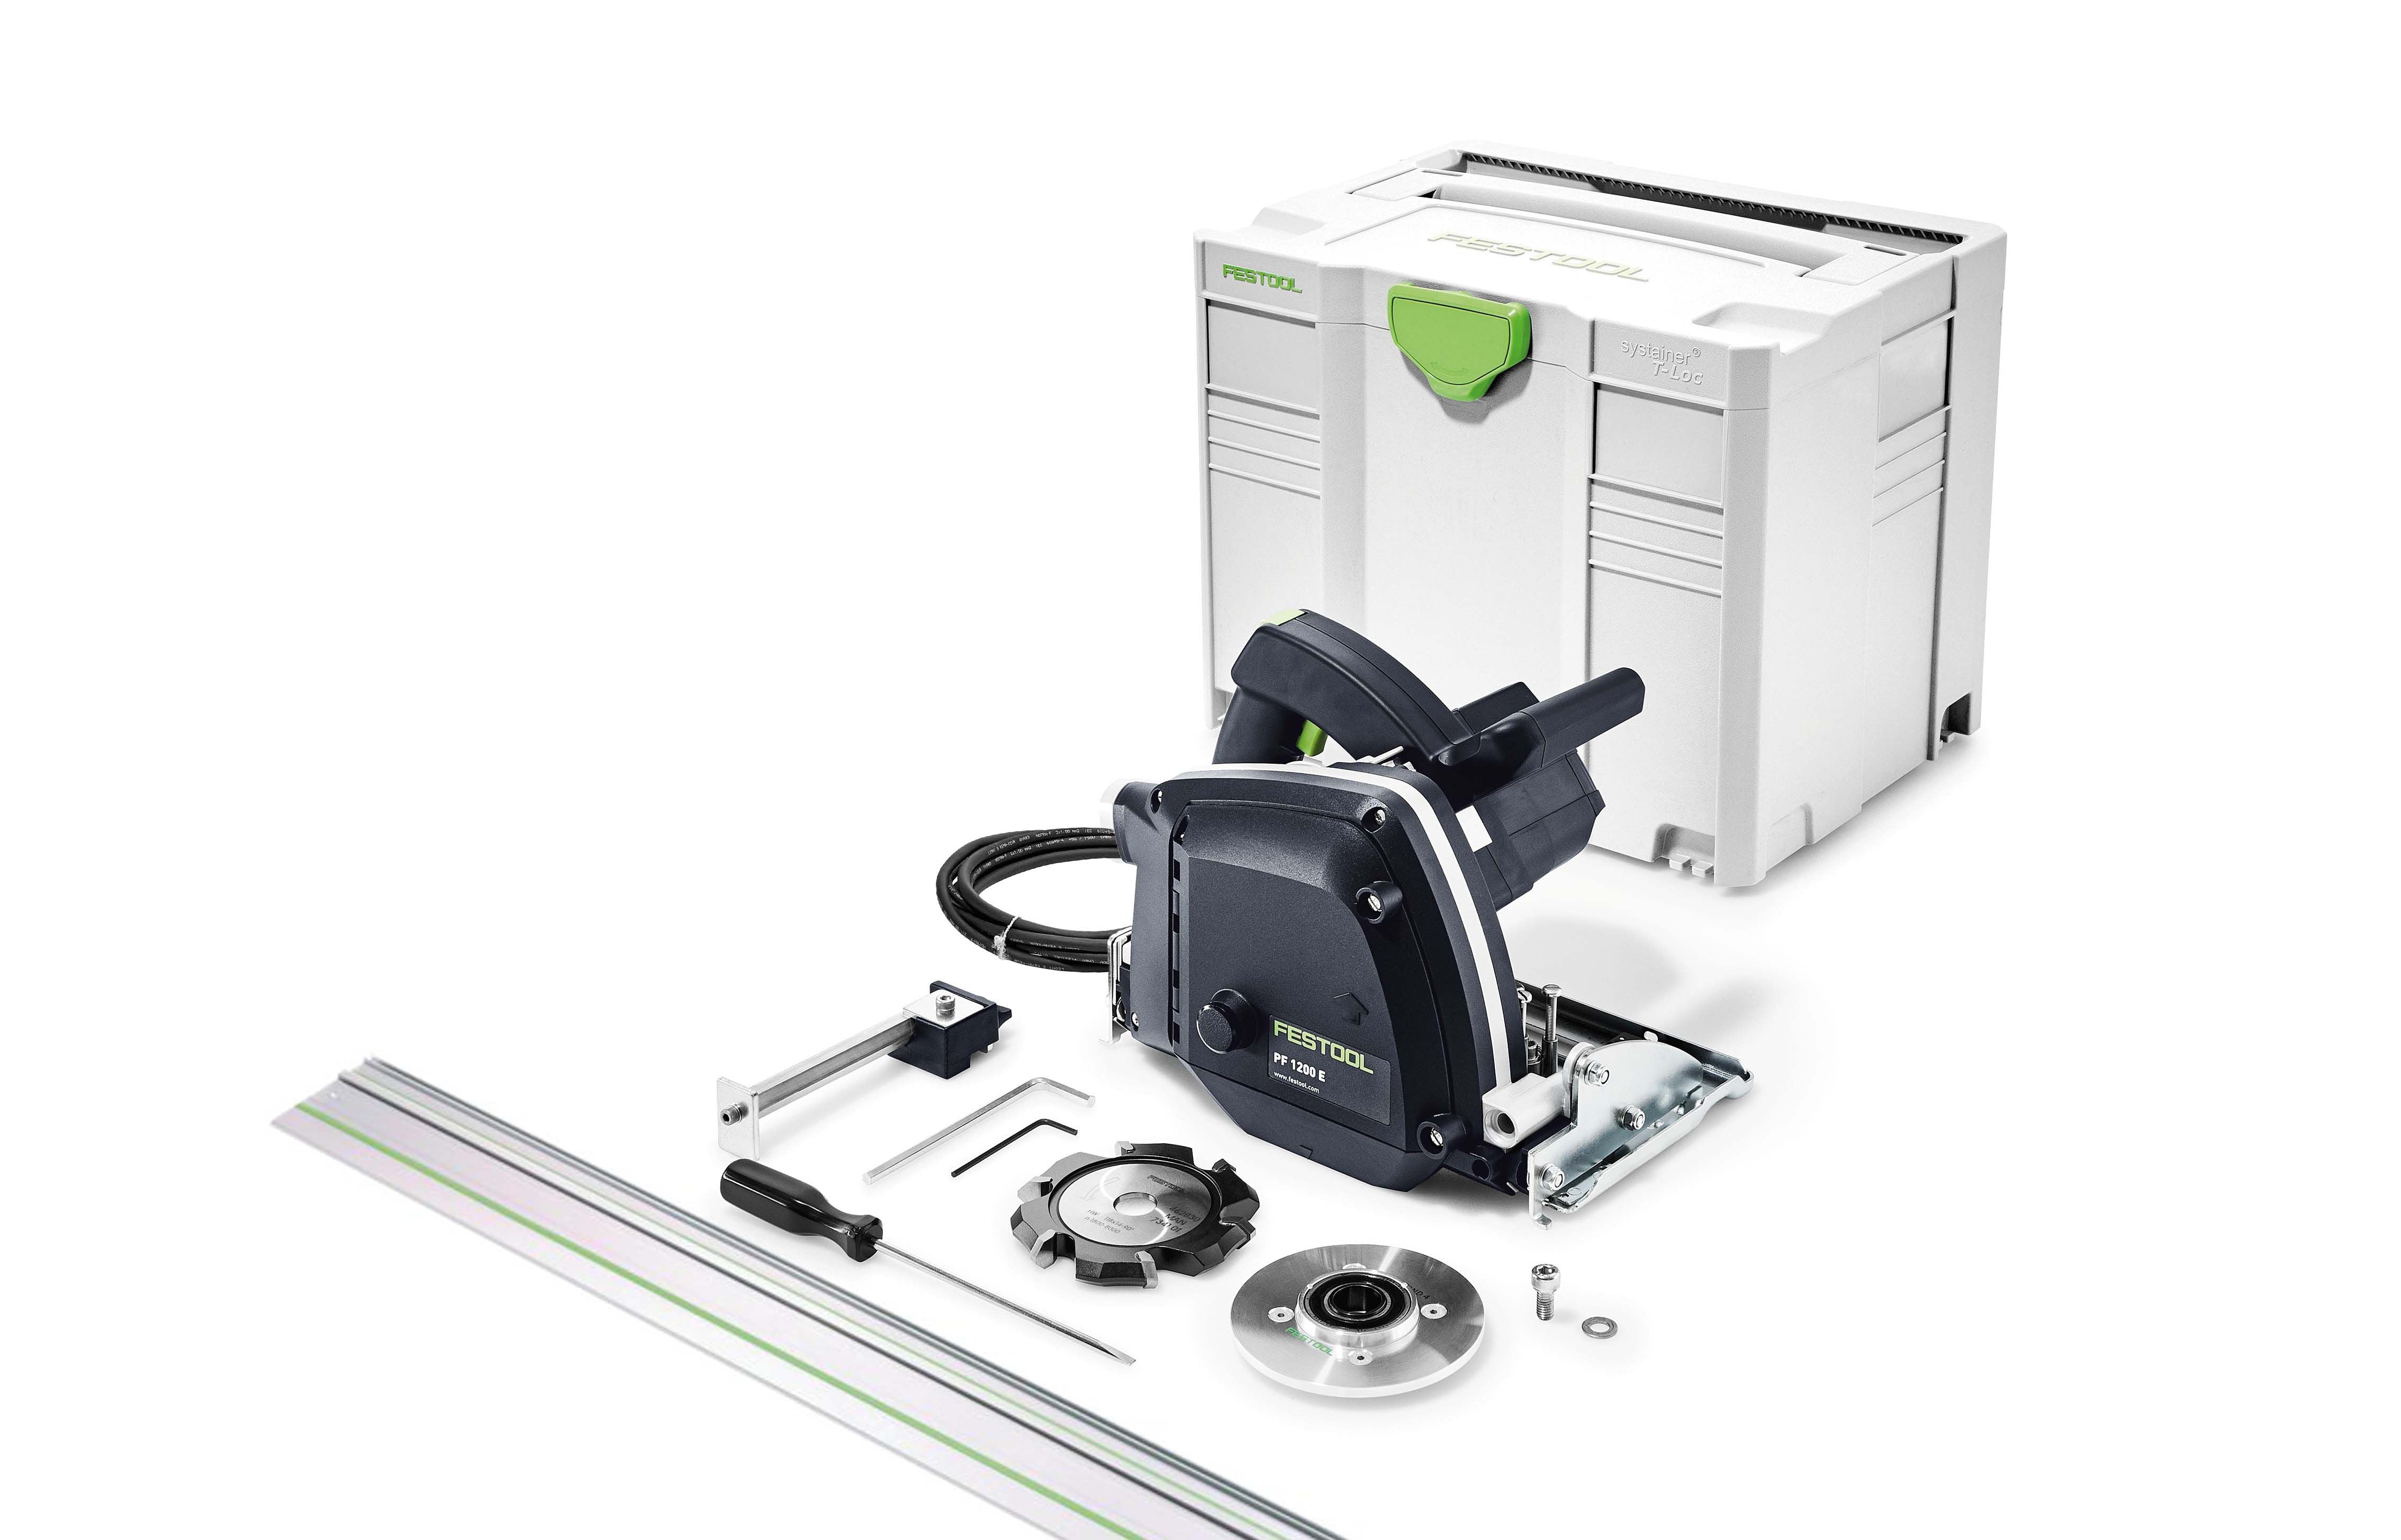 Aluminium Milling Machine in Systainer with 1400mm Guide Rail PF 1200 E-Plus FS (575003) by Festool